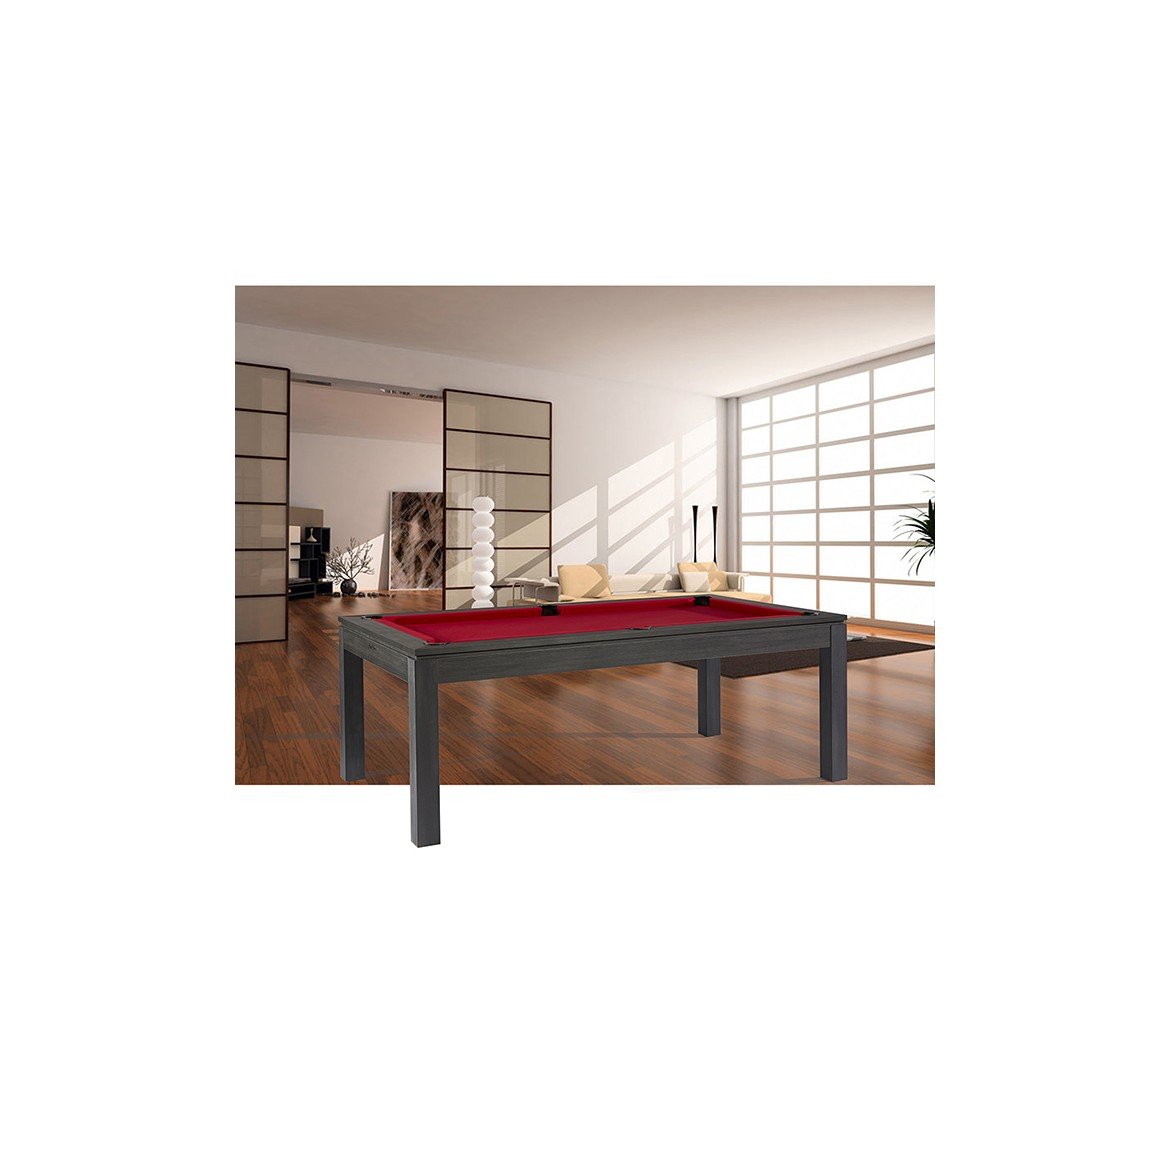 Rene Pierre Billiards Charme Grey with Dining Top